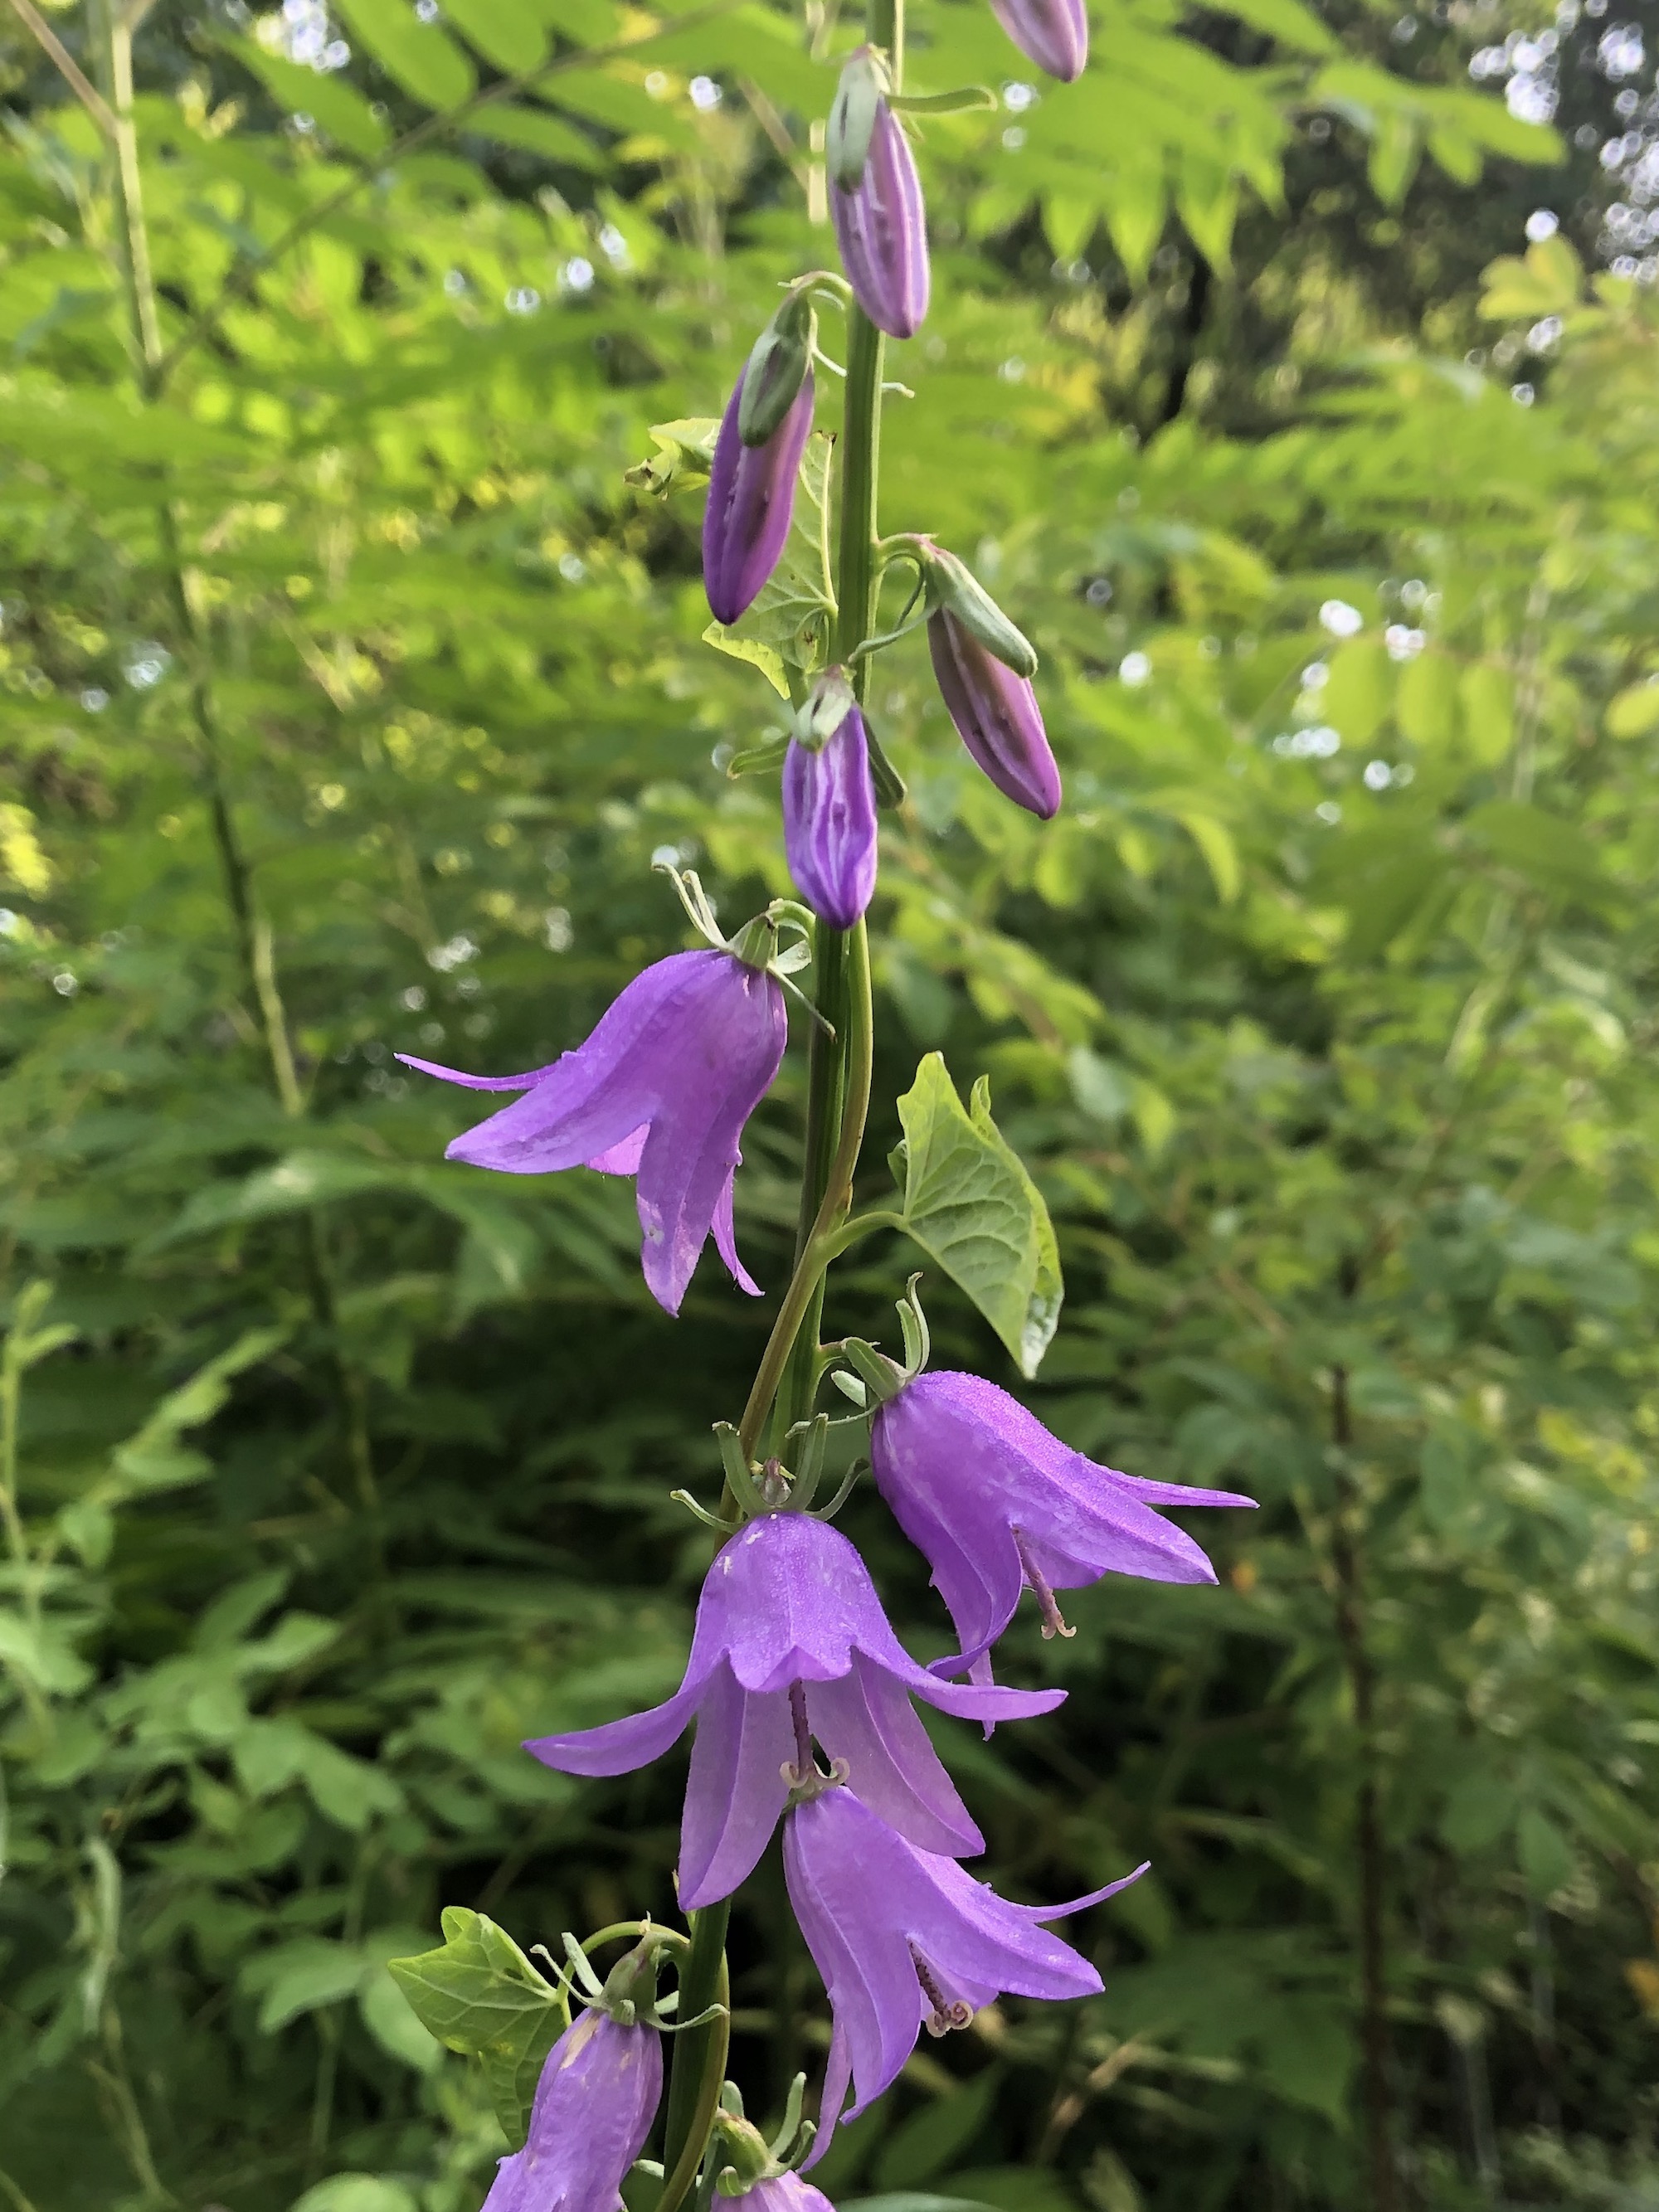 Creeping Bellflower by home in Madison, Wisconsin on July 9, 2021.